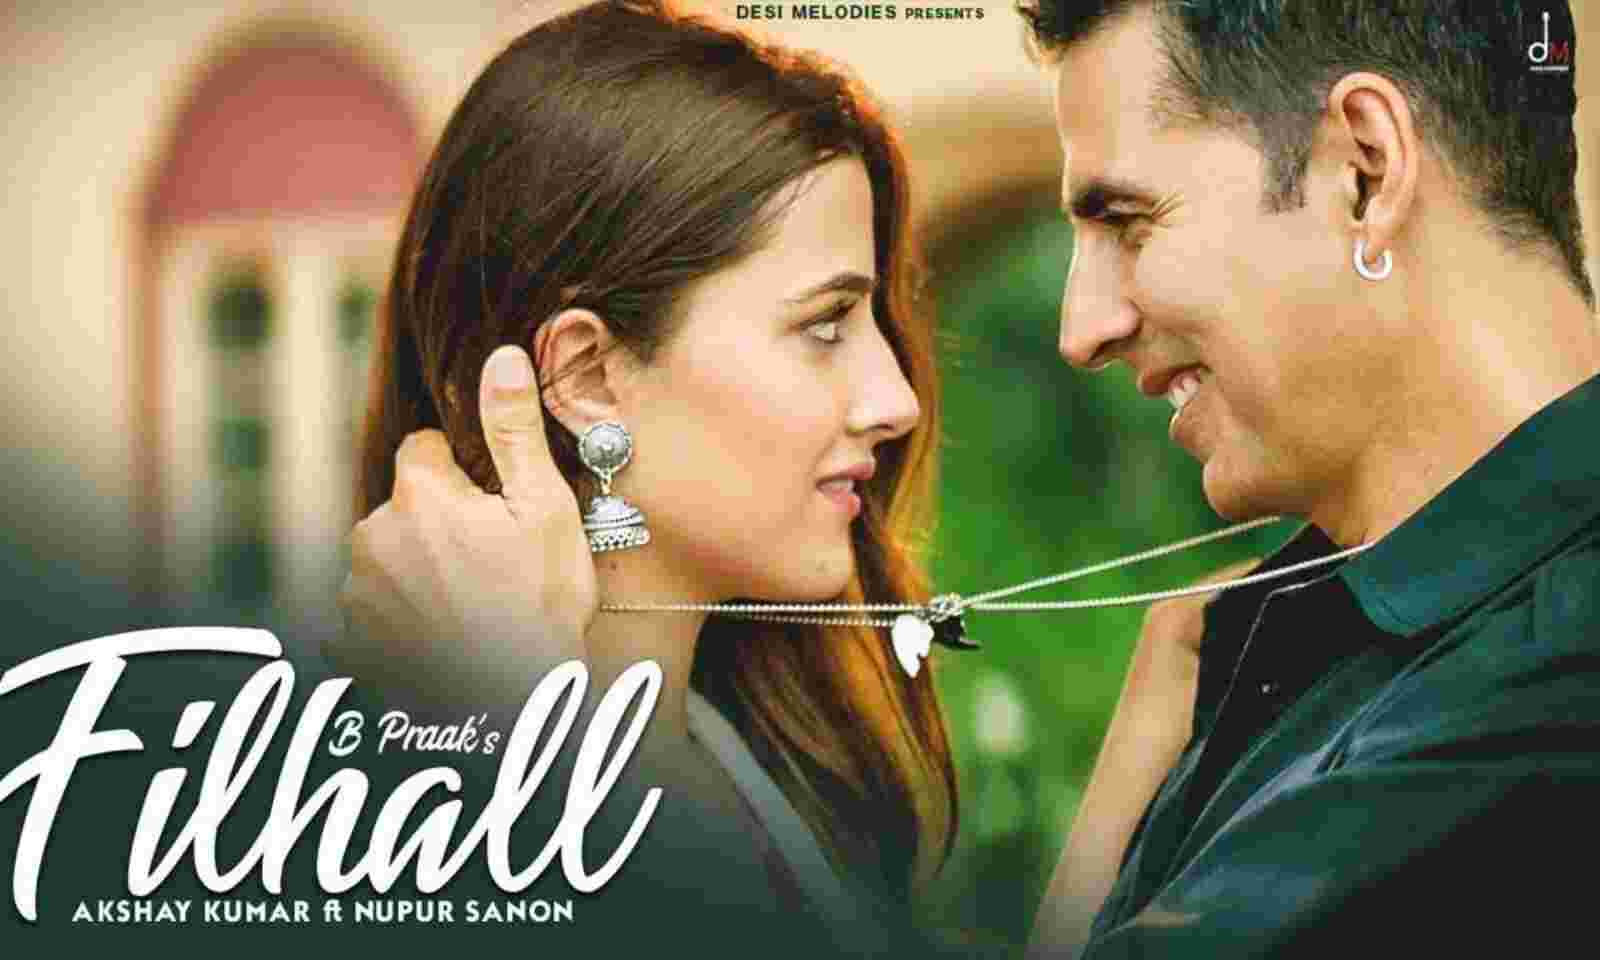 Akshay Kumar Unveils The First Look Poster Of Filhaal 2 Song